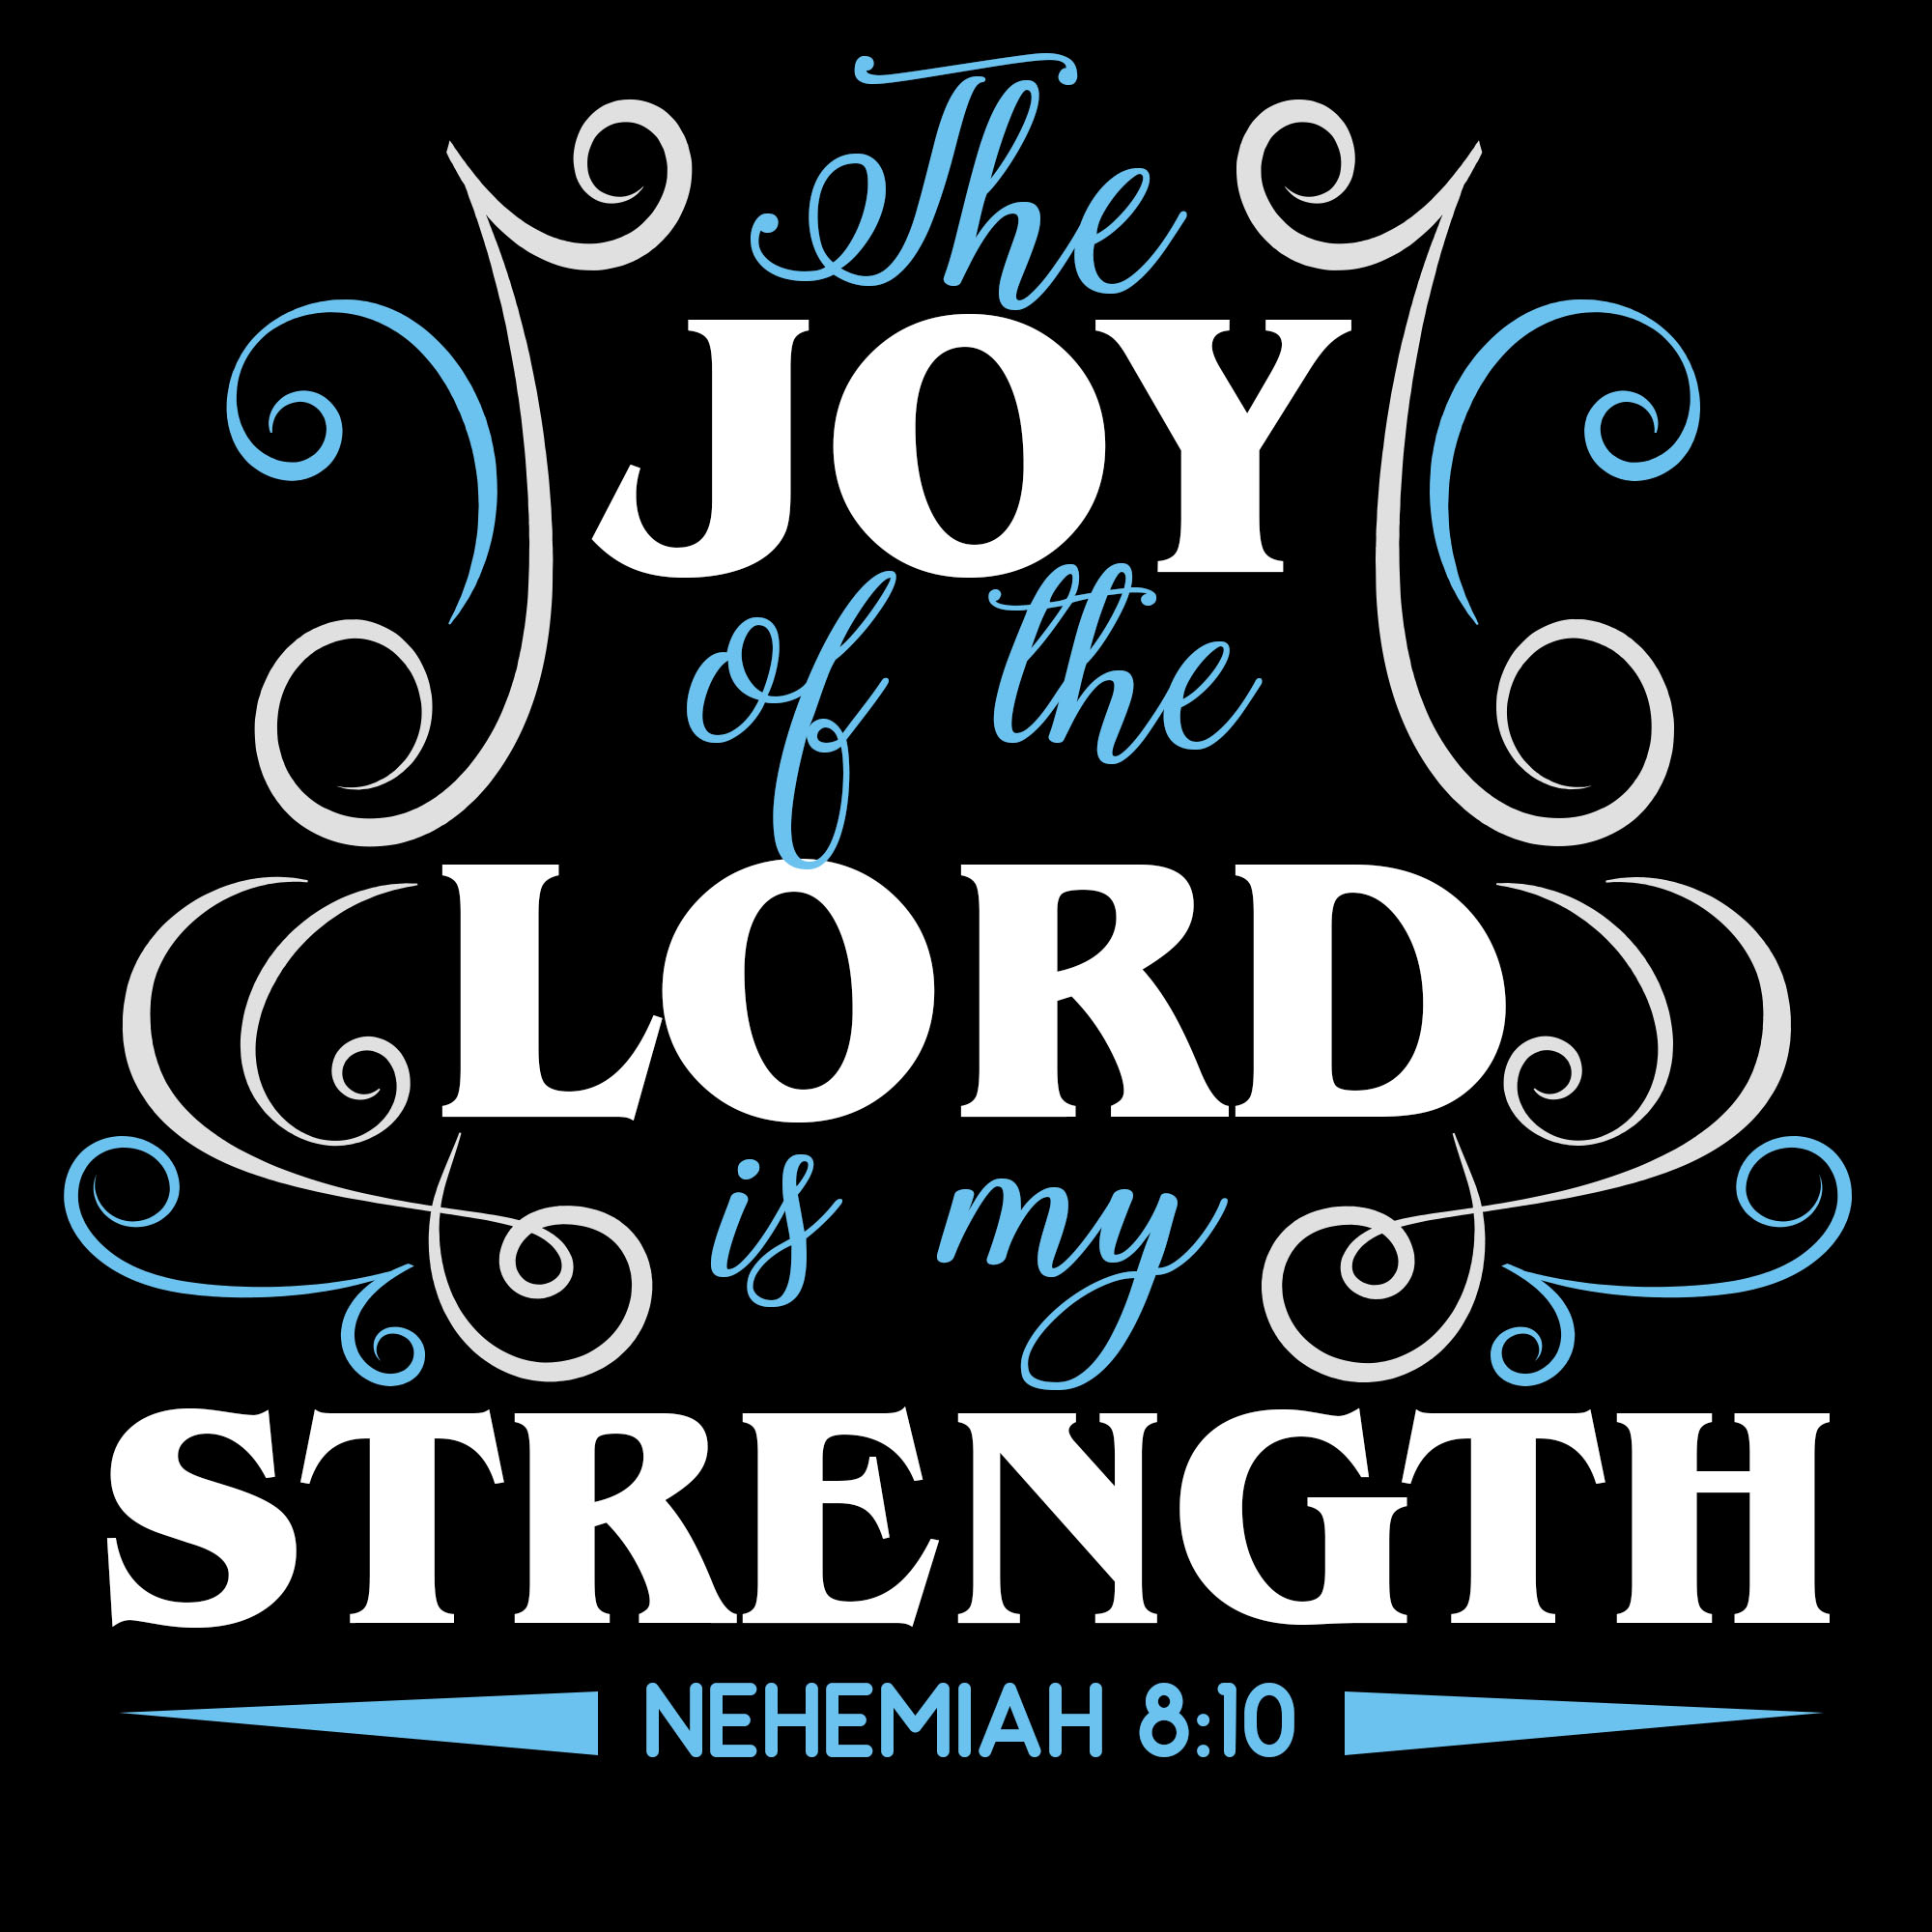 the-joy-of-the-lord-is-my-strength-vector.jpg